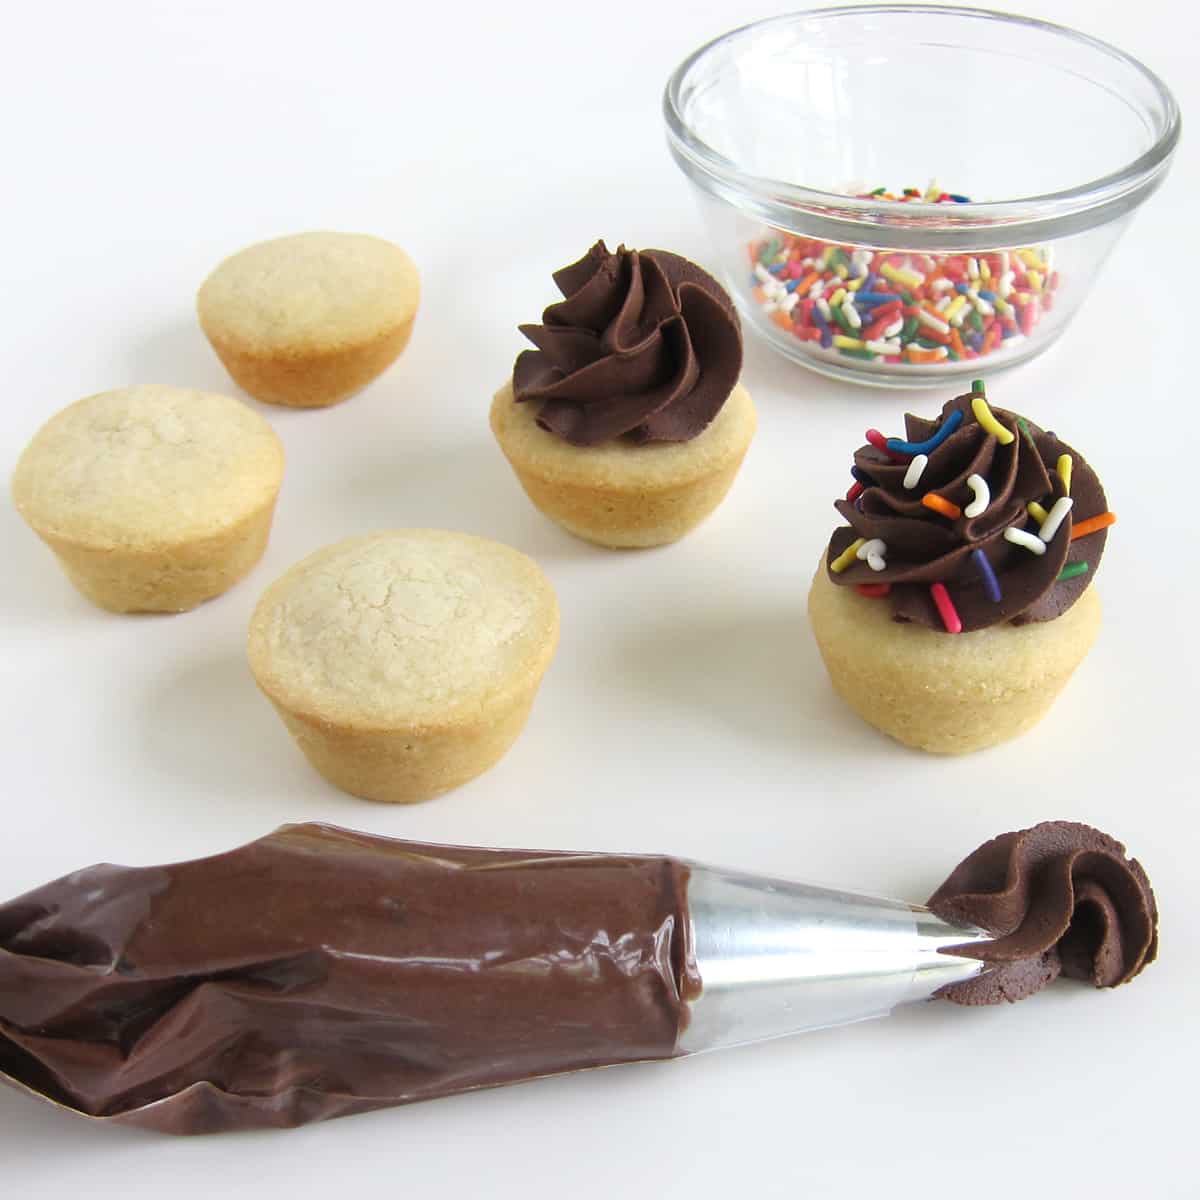 Pipe chocolate frosting on sugar cookie cups then add rainbow sprinkles on top.